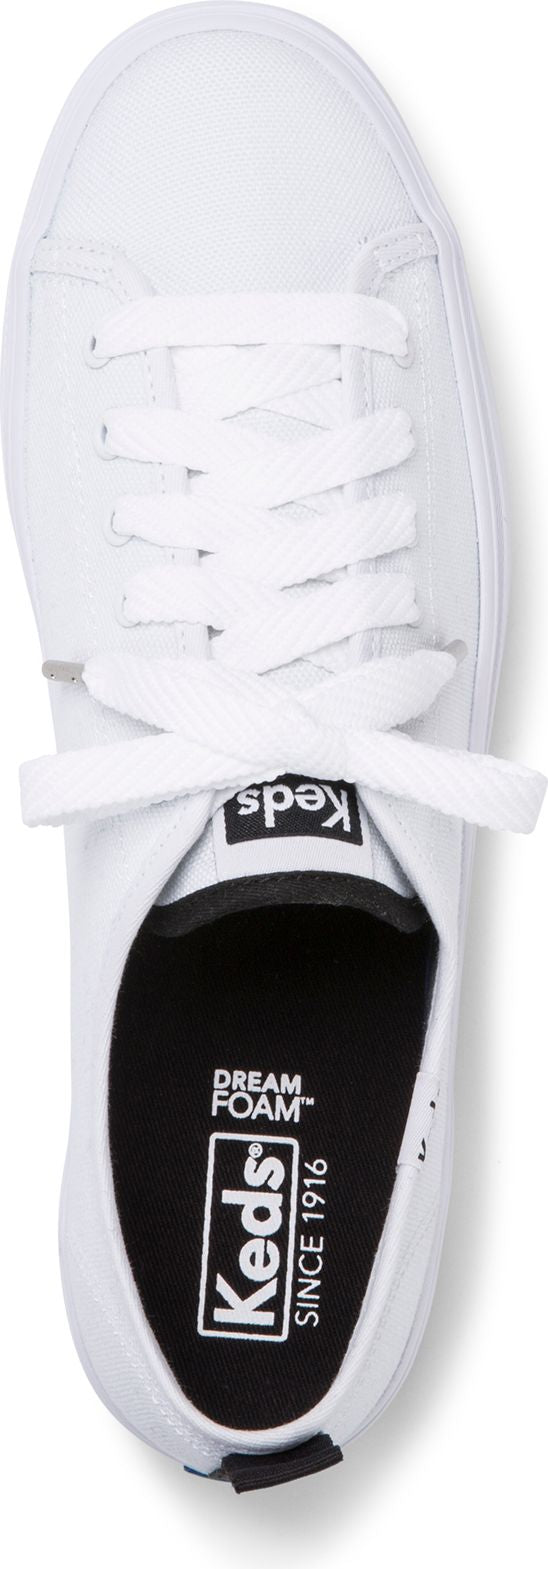 Keds Shoes Triple Up Solids White